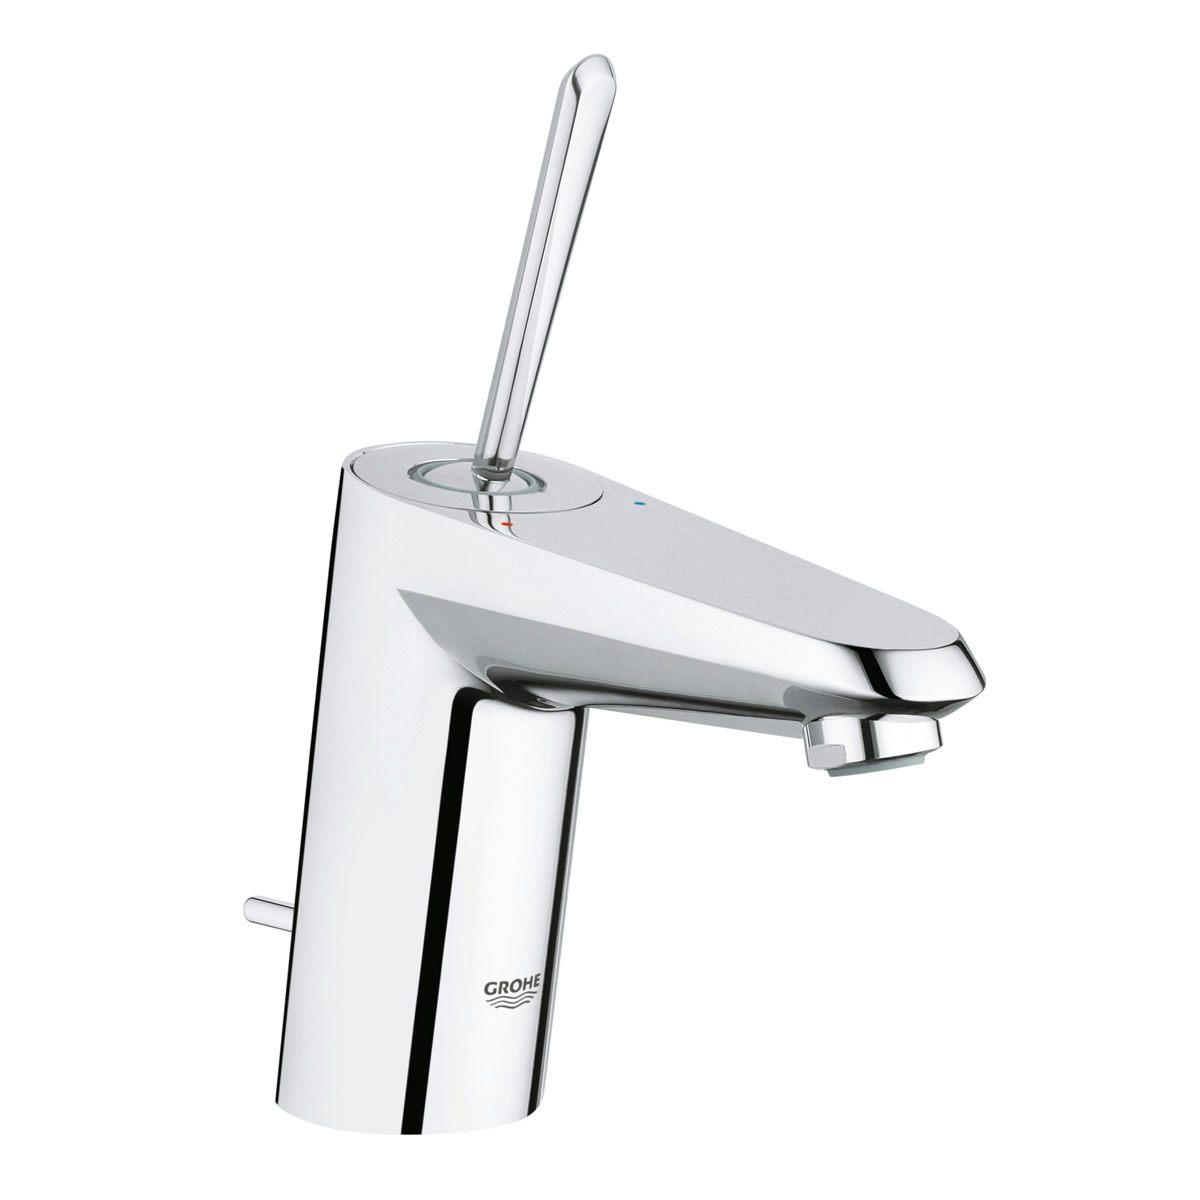 Grohe Eurodisc Joy basin mixer tap with waste and tap adaptor